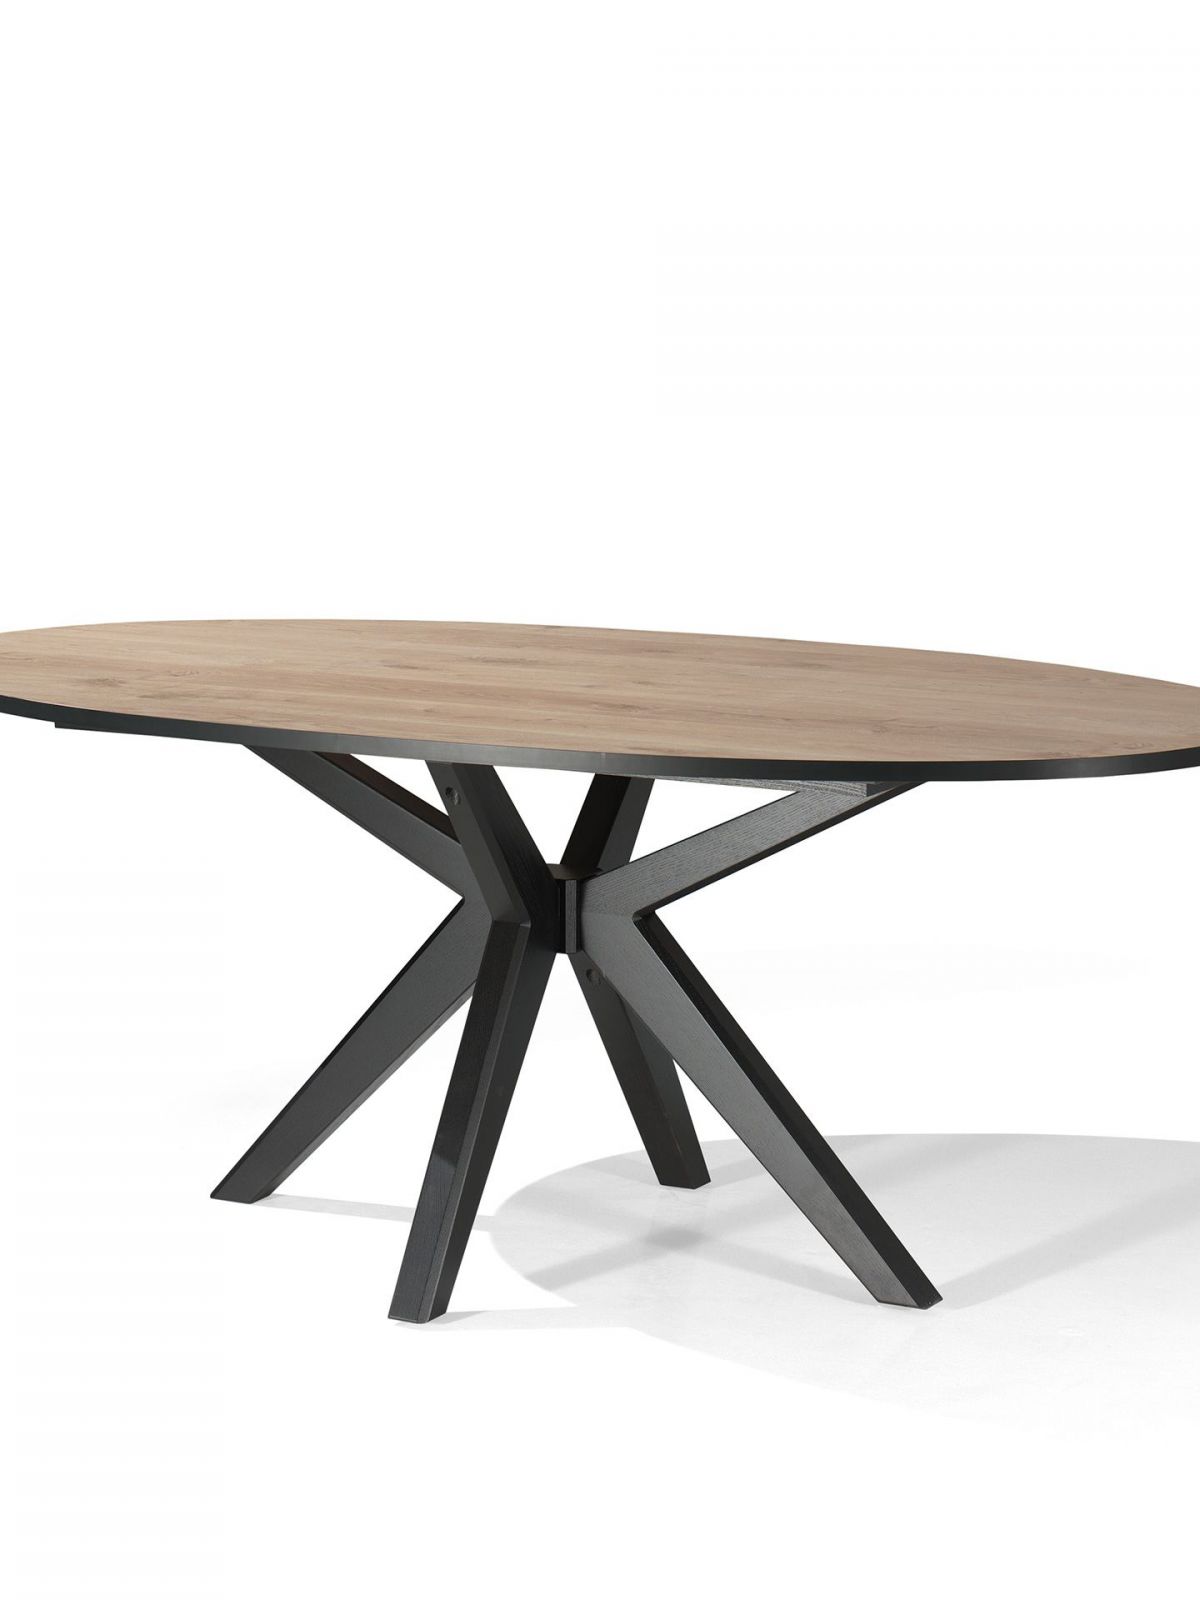 Table ovale fixe X-pied central